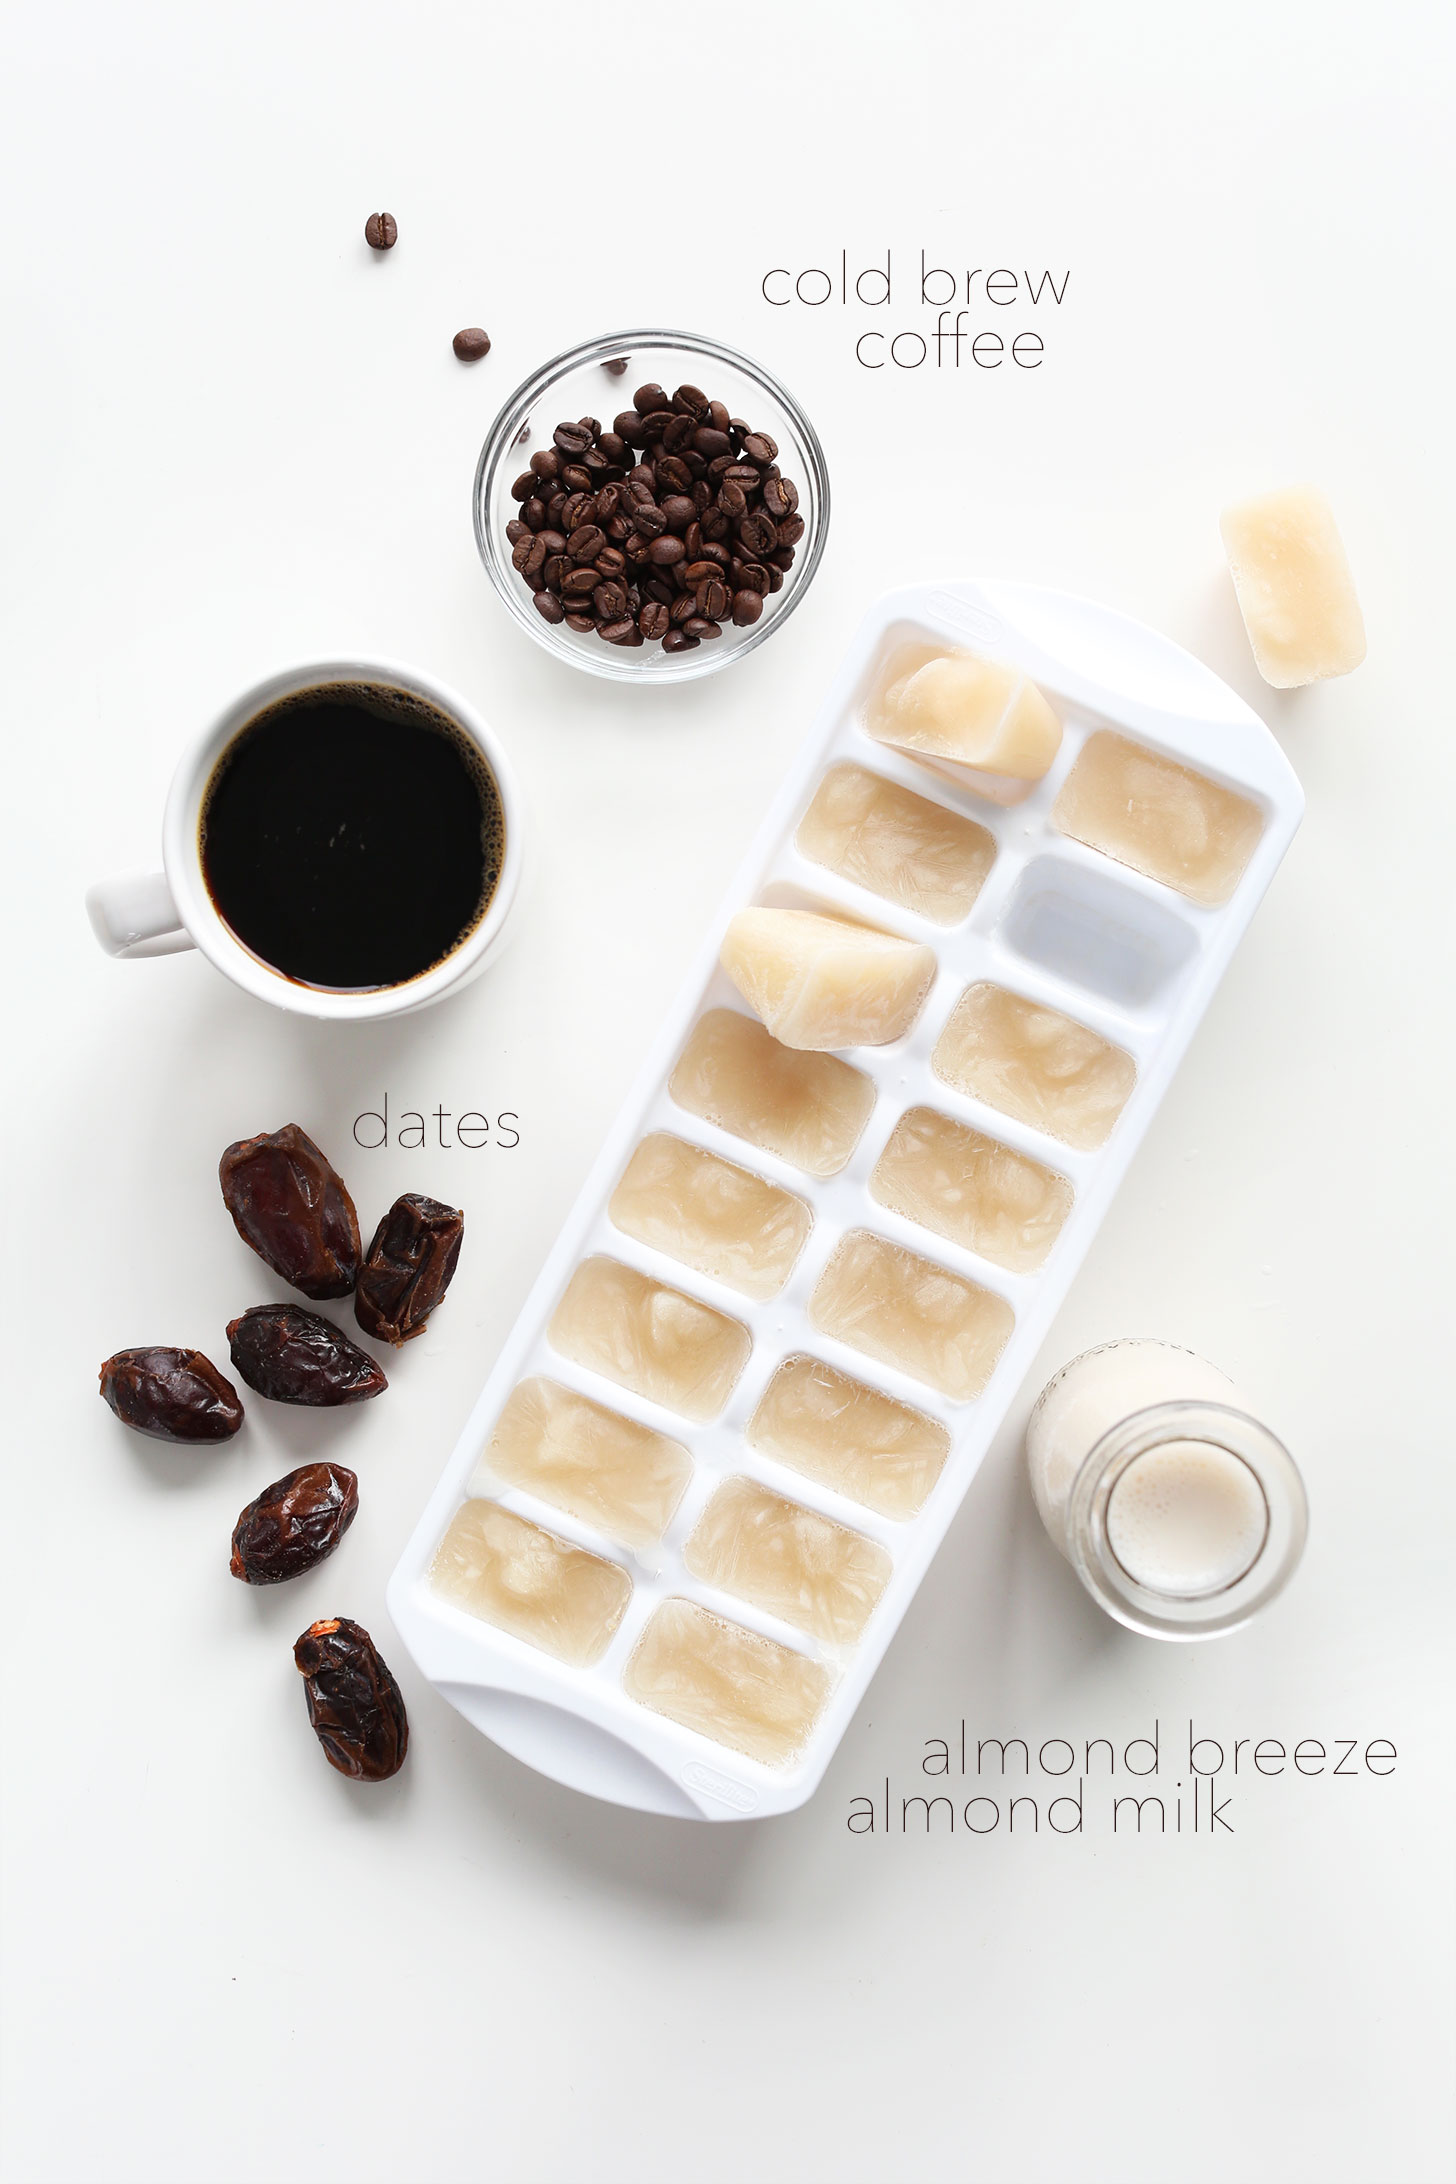 Almond milk ice cubes, dates, and coffee for making a vegan Caramel Frappuccino